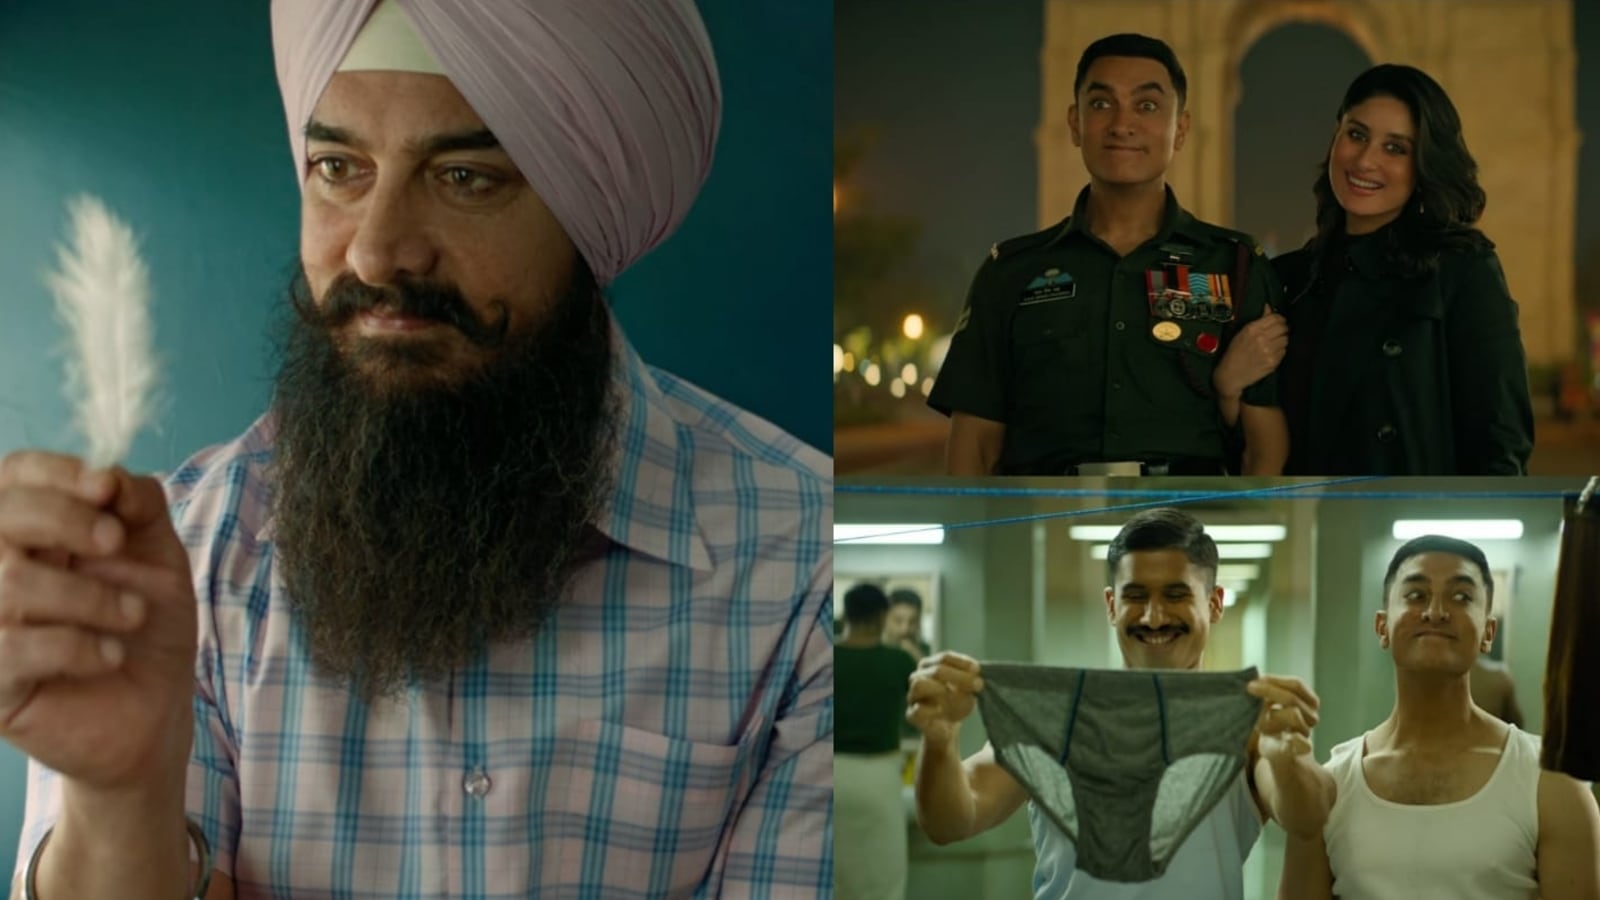 Laal Singh Chaddha: Aamir Khan's Looks As Army Officer Out! Forrest Gump  Fans Here's A Good Note To Begin Your Day